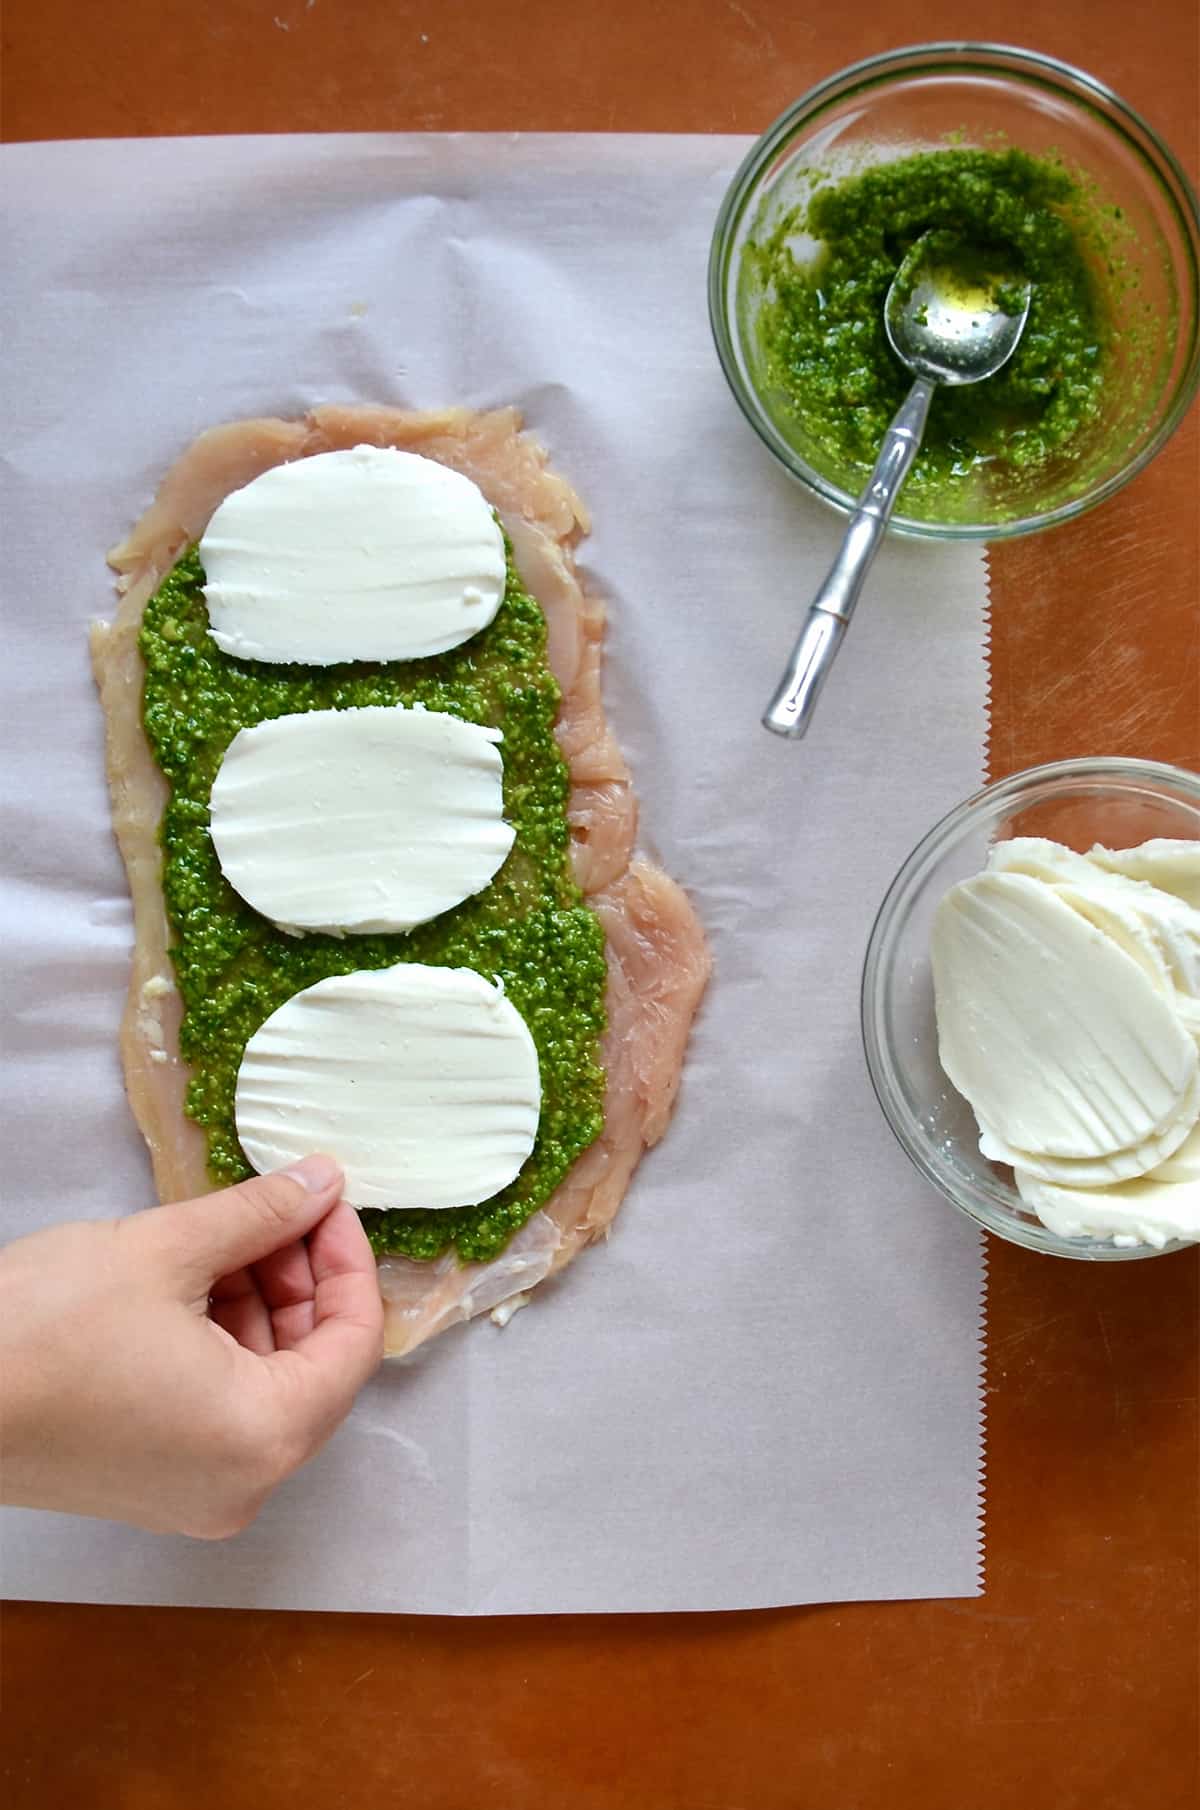 Thinly pounded chicken is topped with pesto and sliced mozzarella. Nearby are bowls of pesto and mozzarella cheese.